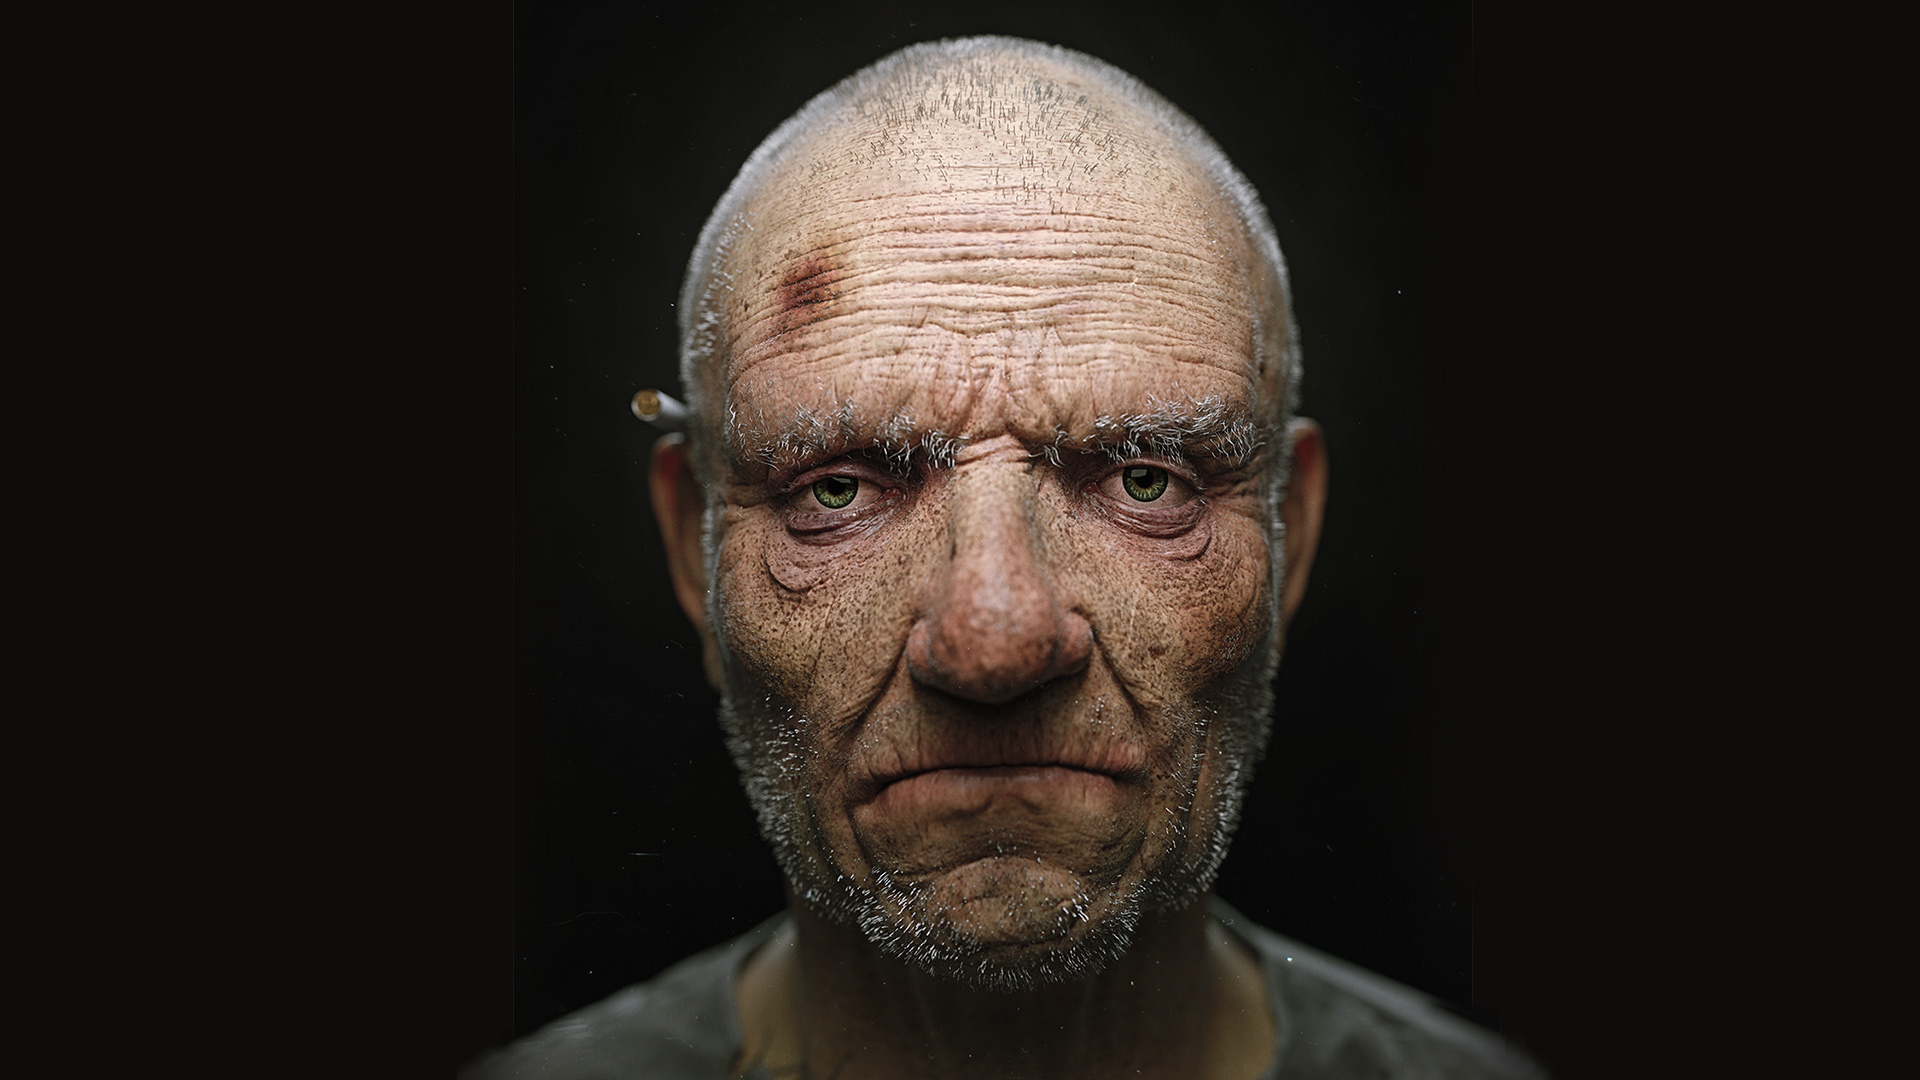 Super Realistic 3D Rendering of a Homeless